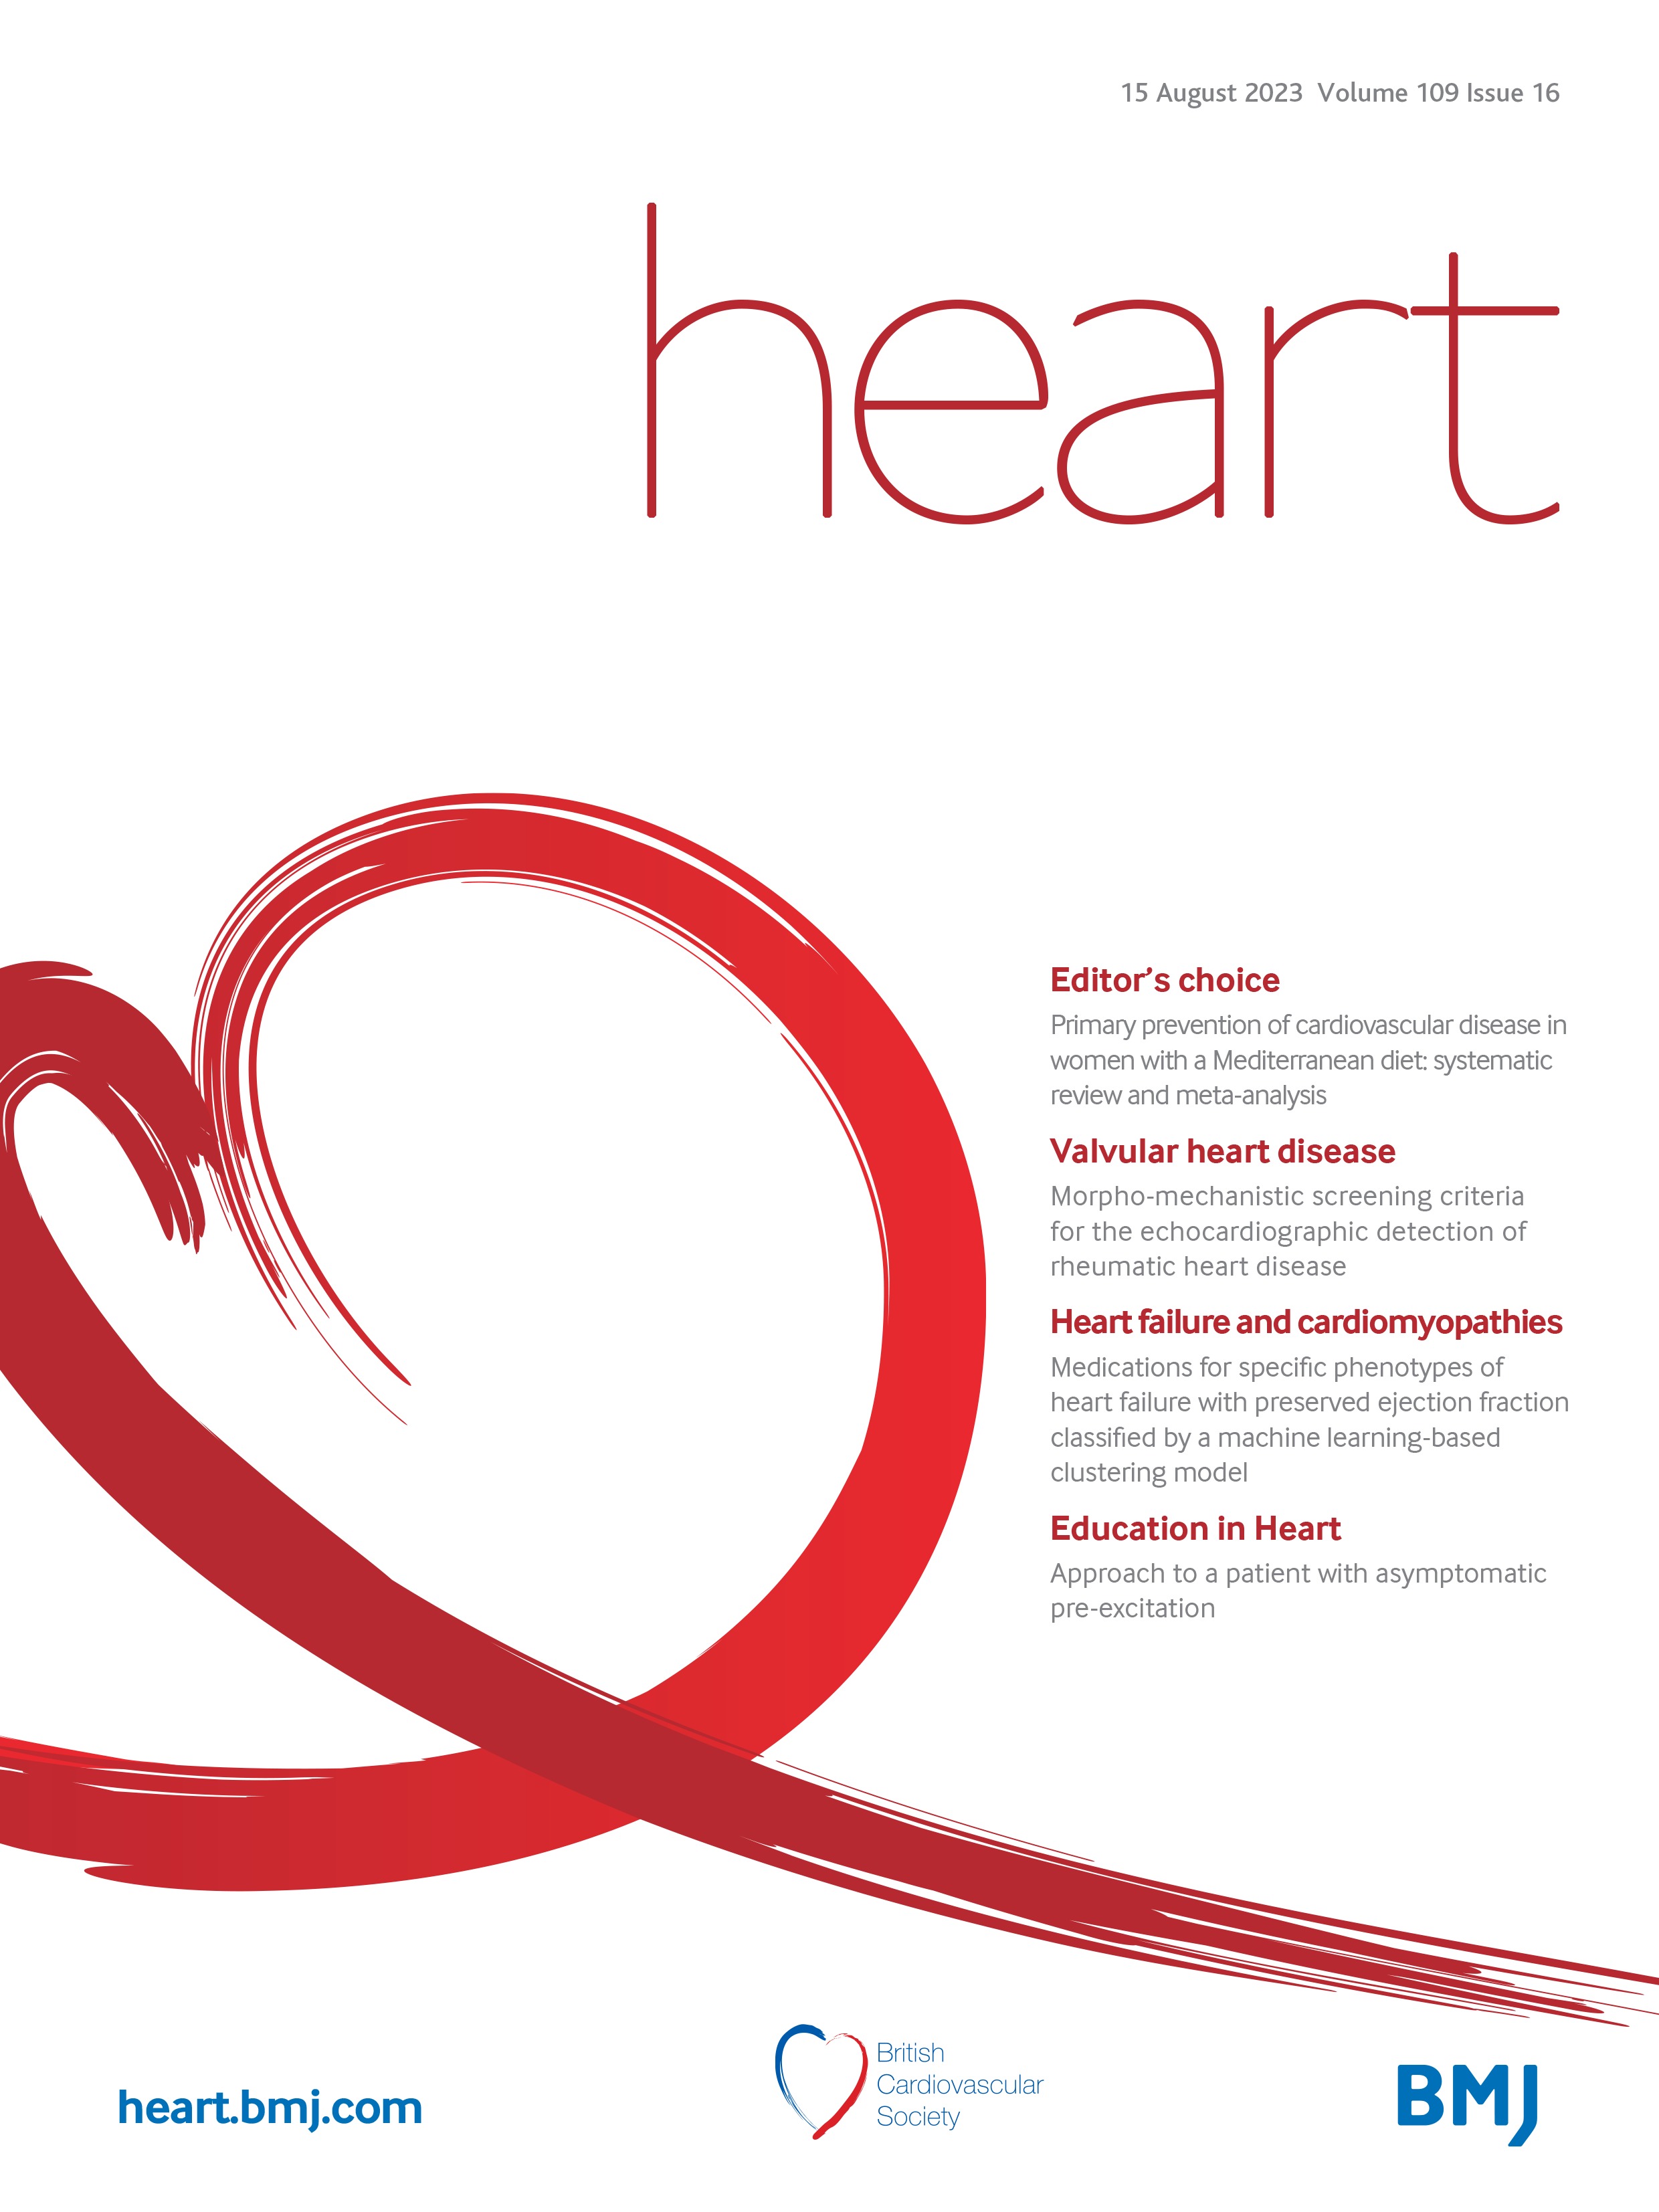 Systolic blood pressure, chronic obstructive pulmonary disease and cardiovascular risk